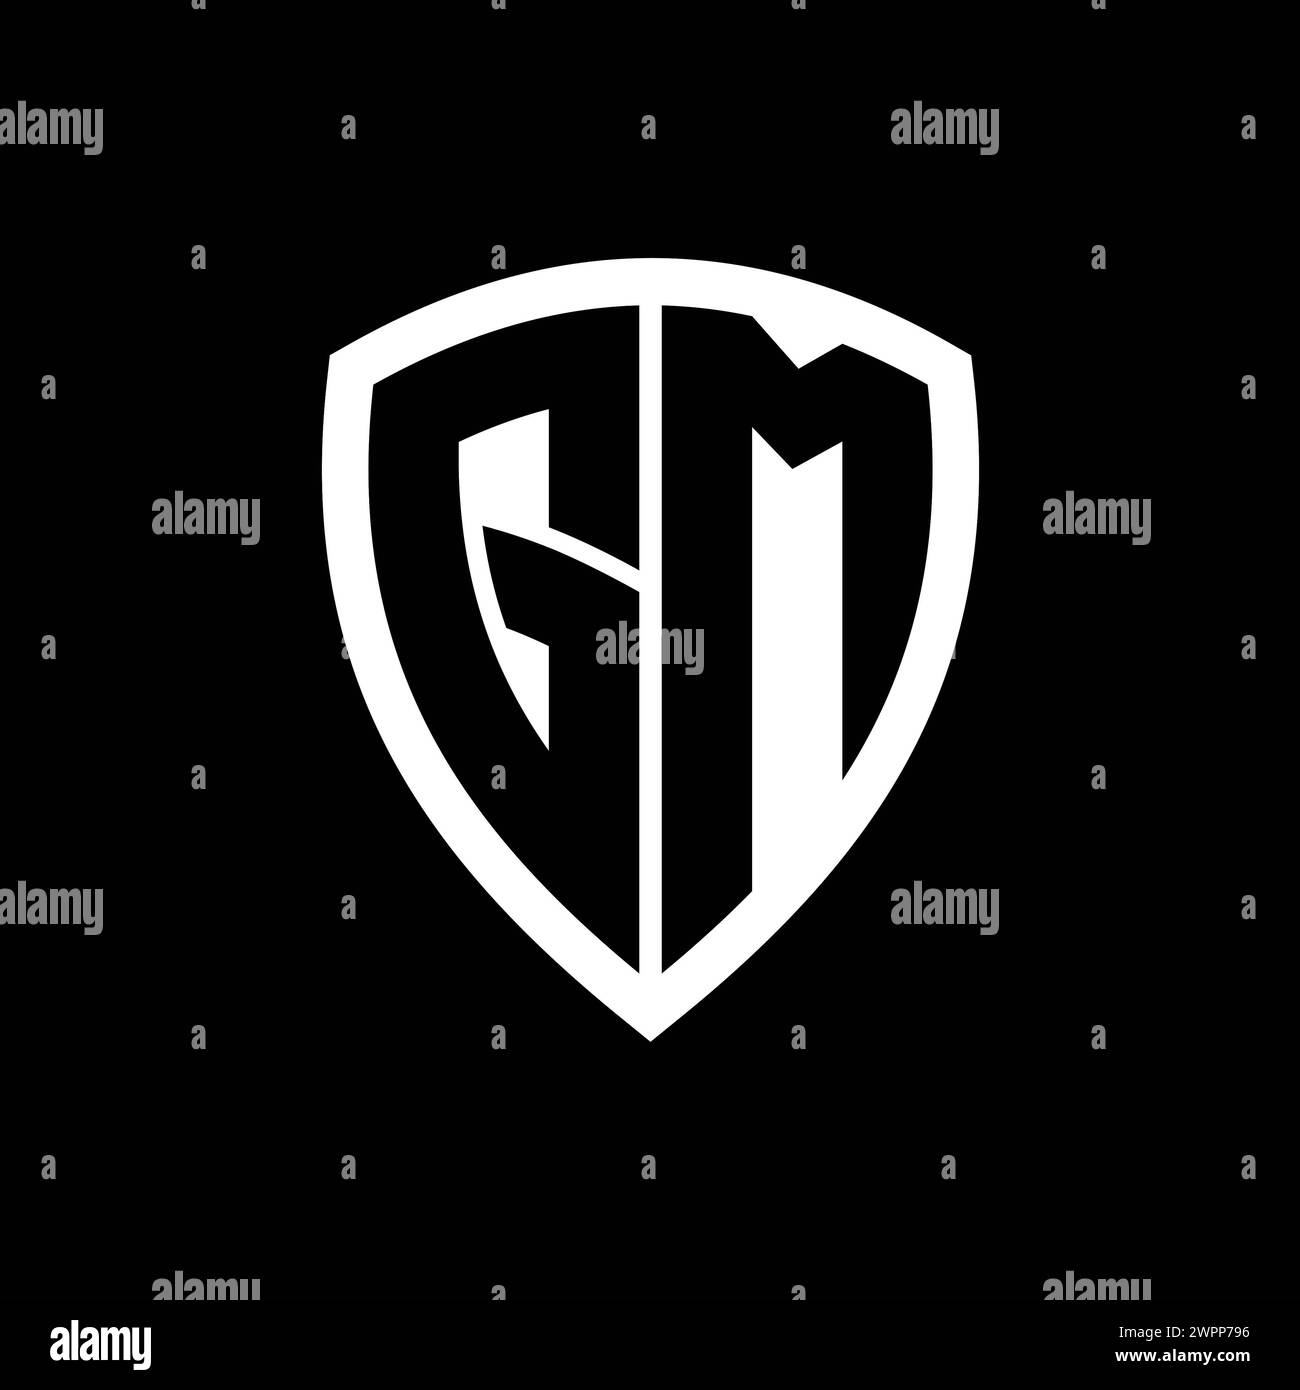 GM monogram logo with bold letters shield shape with black and white color design template Stock Photo